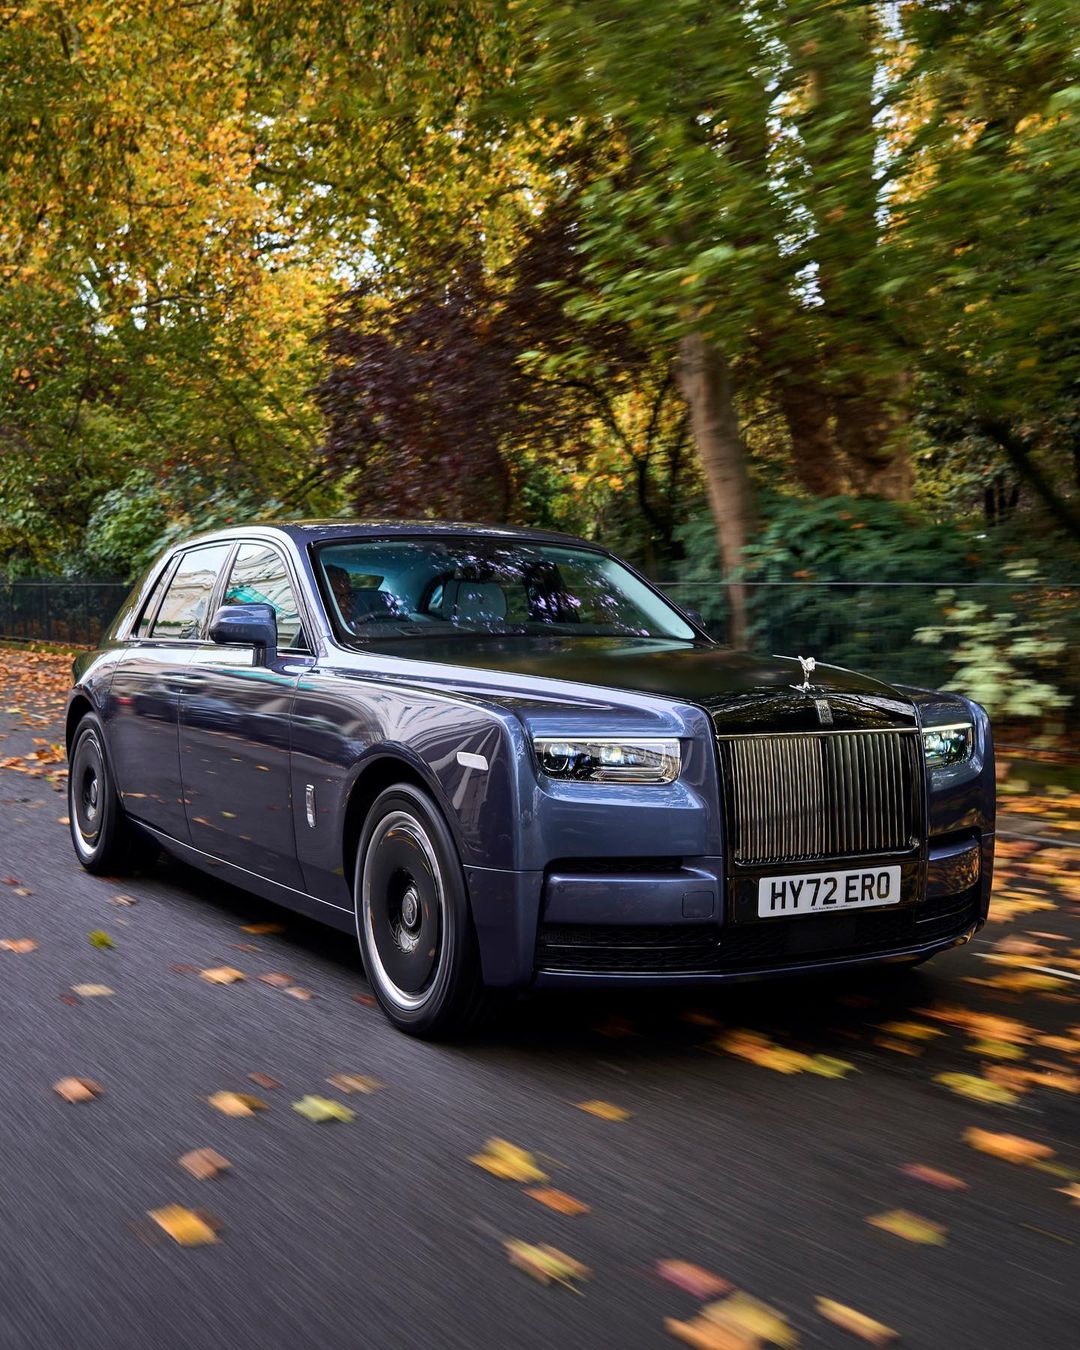 One of the top publications of @rollsroycecars which has 170.7K likes and 339 comments